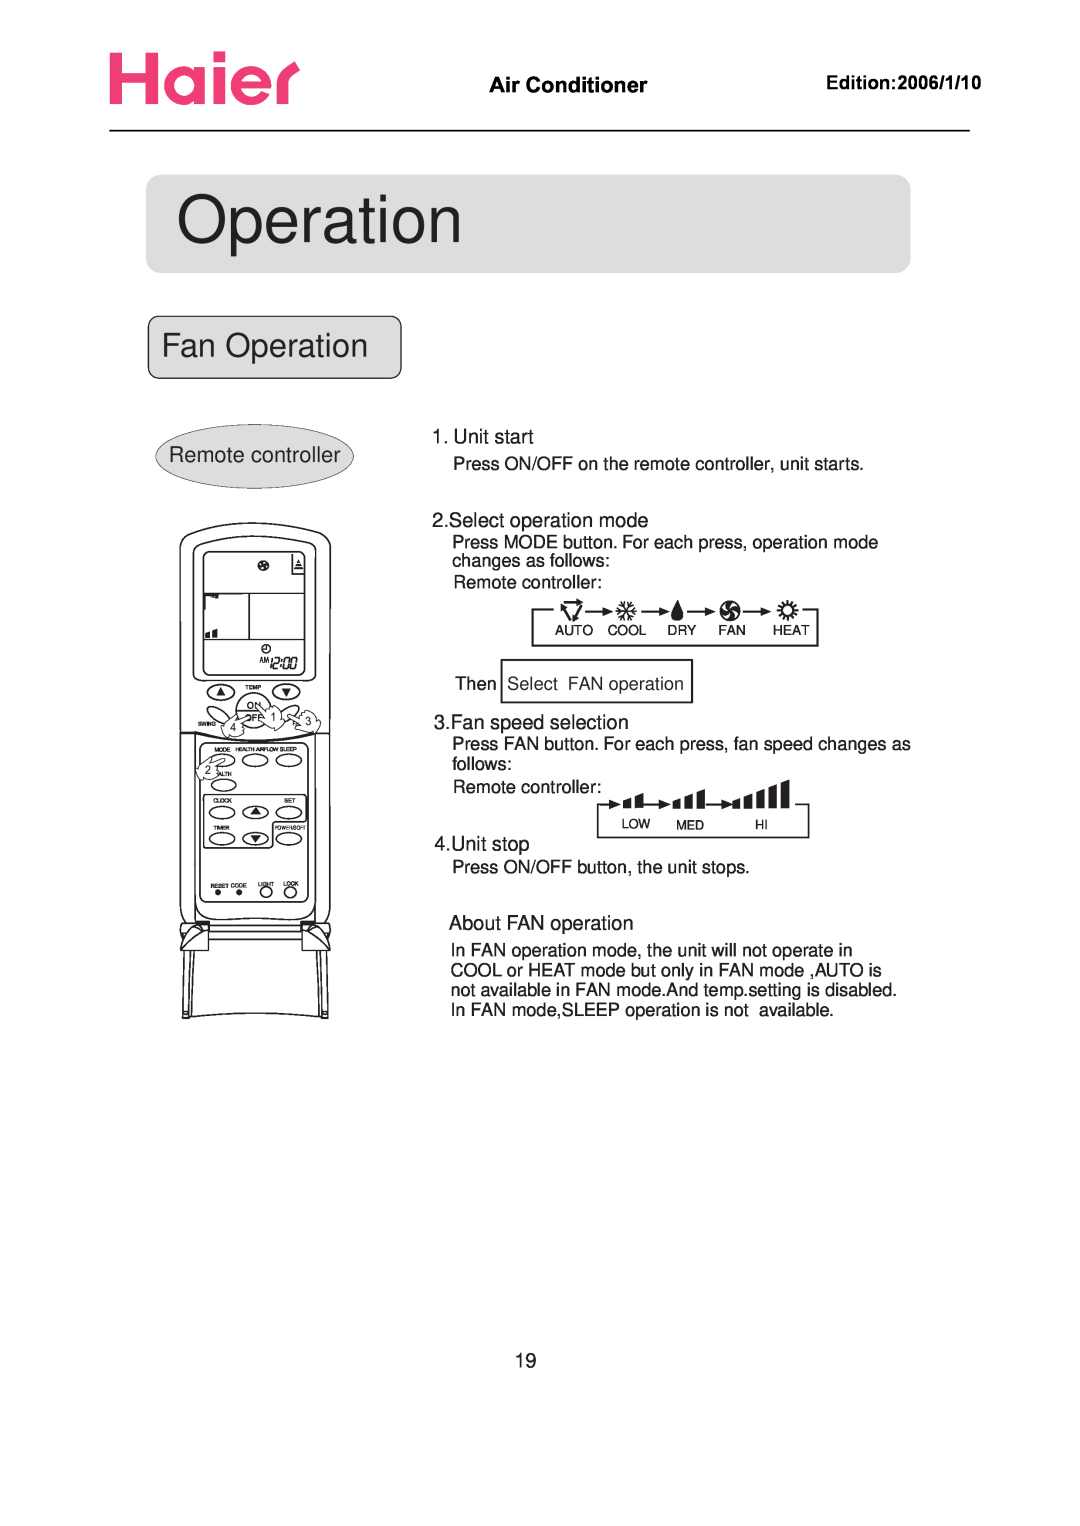 Haier Compact Air Conditioner manual Fan Operation, Remote controller, Air Conditioner      , Edition 2006/1/10 